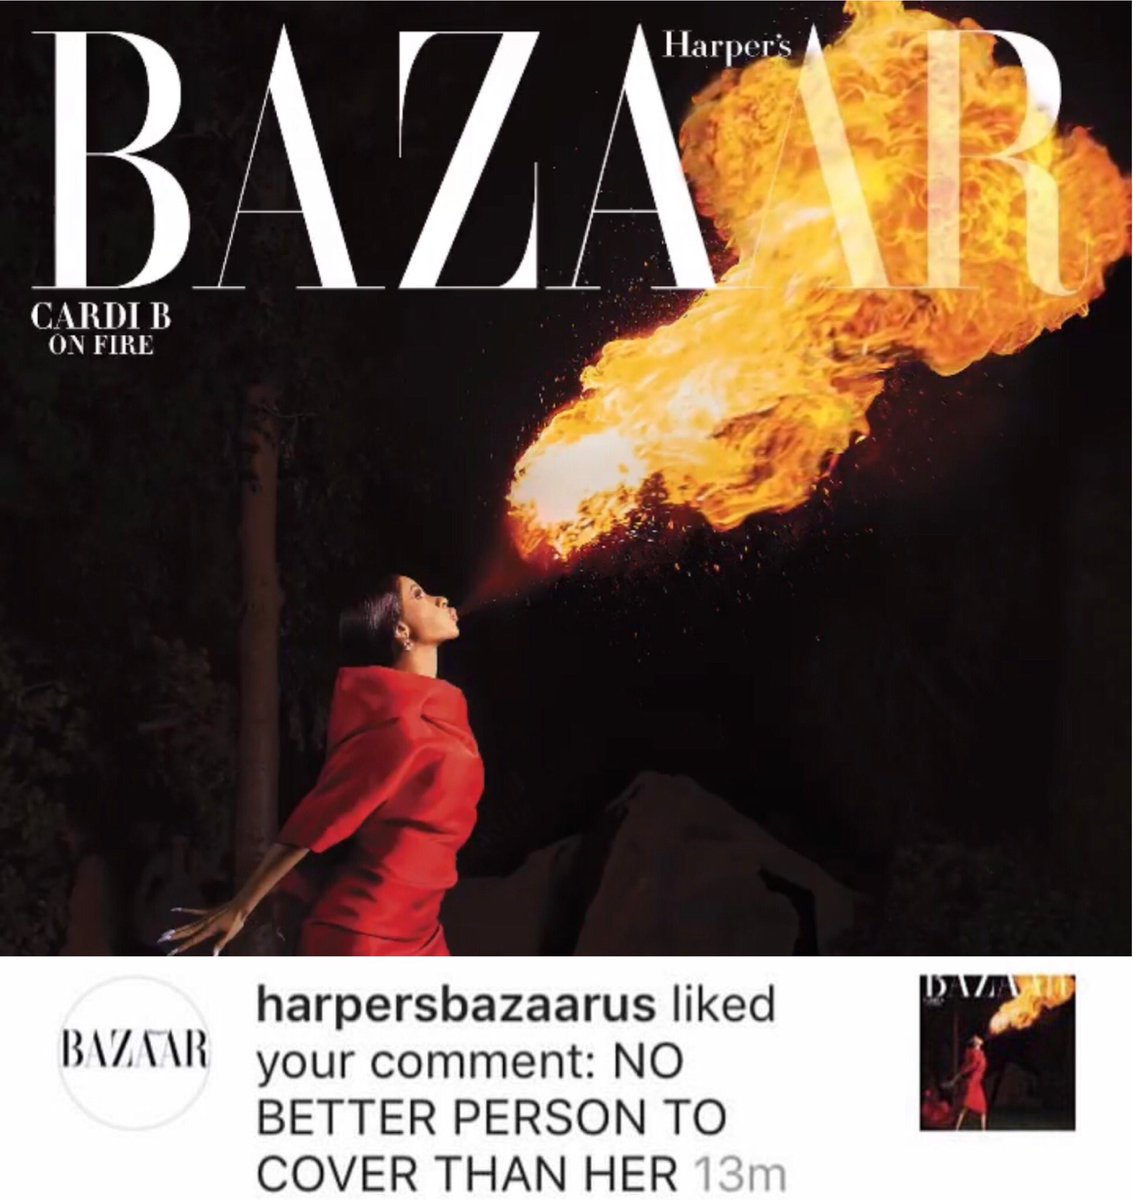 Harper’s Bazaar liked this comment about Cardi’s cover.